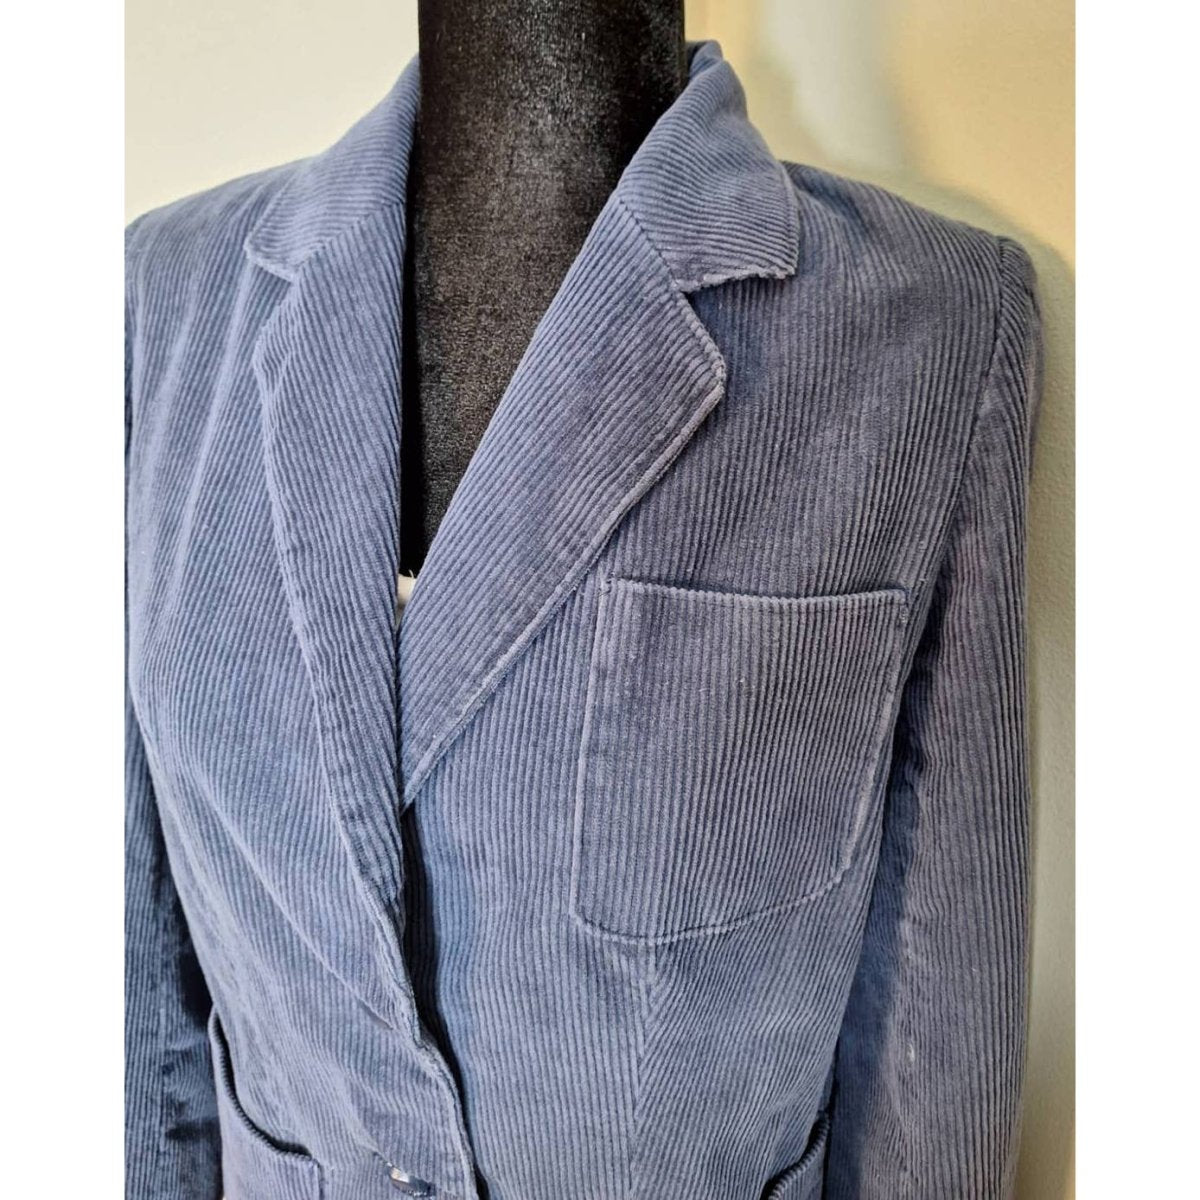 70s Vintage Dusty Blue 2 Button Corduroy Blazer Jacket Size Small Chest 34-36" - themallvintage The Mall Vintage